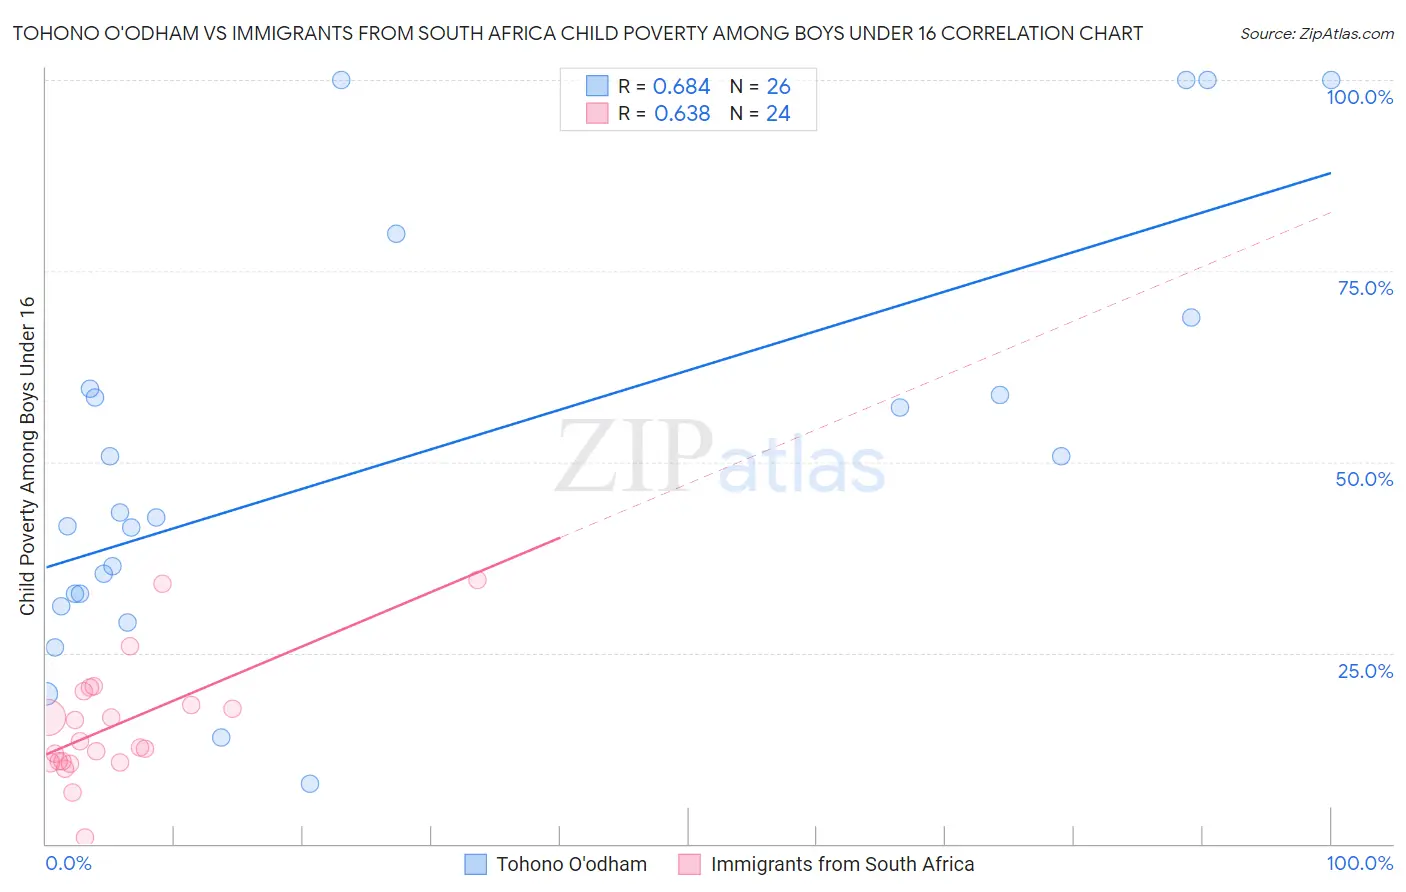 Tohono O'odham vs Immigrants from South Africa Child Poverty Among Boys Under 16